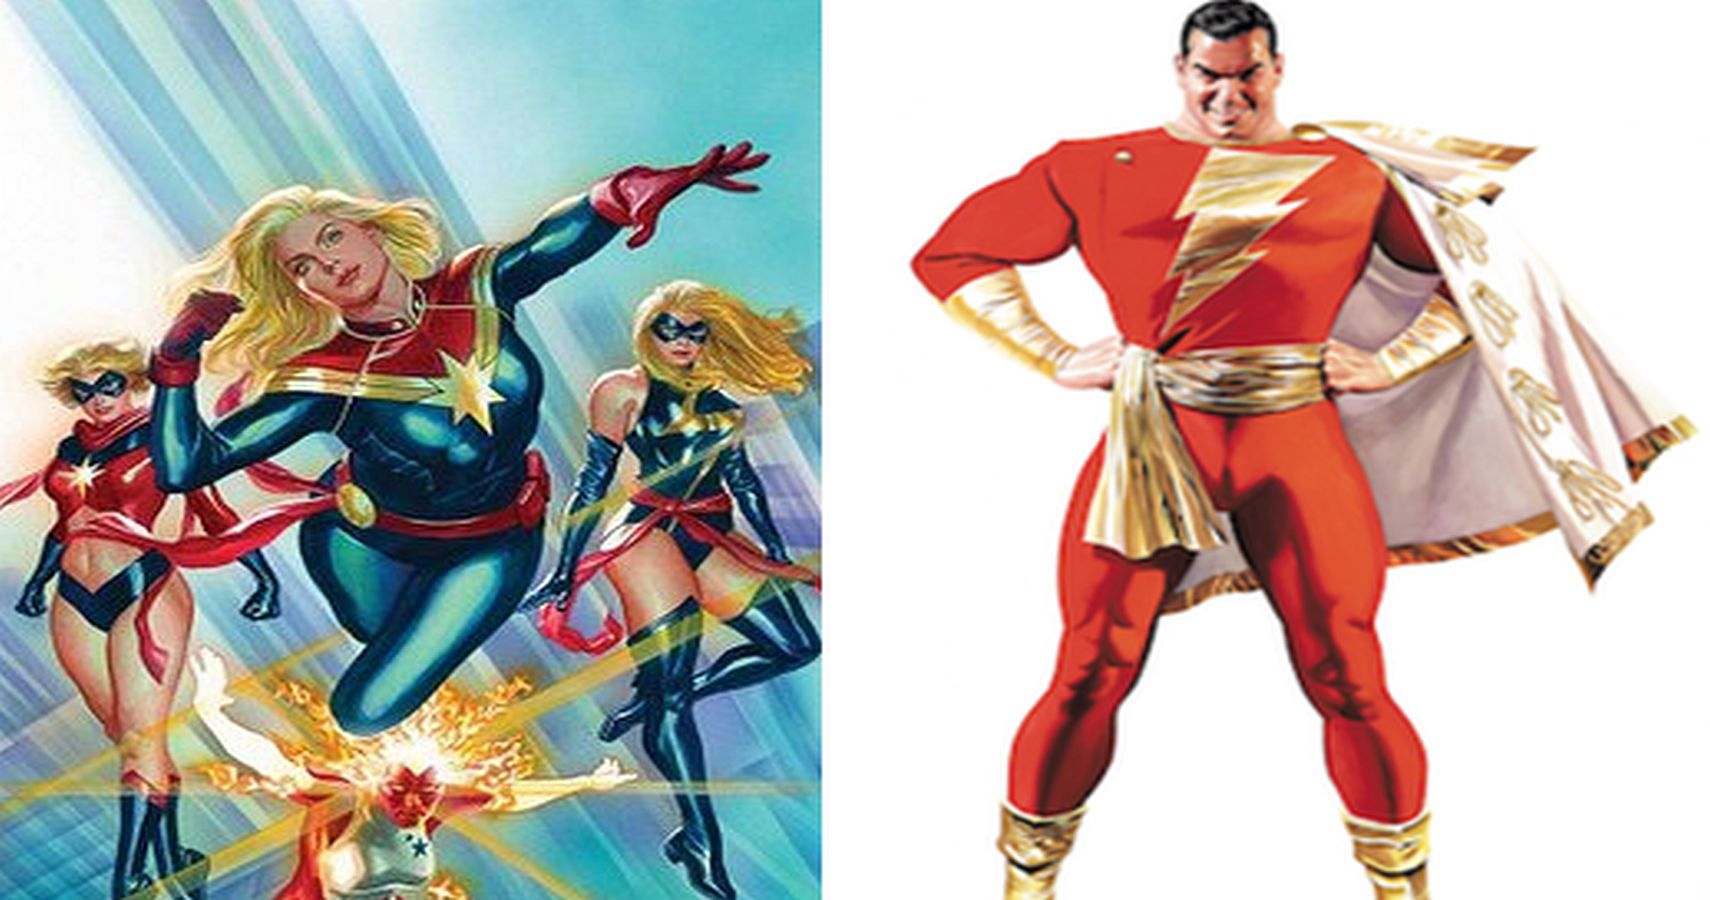 Who wins in a contest between Shazam and Captain Marvel?